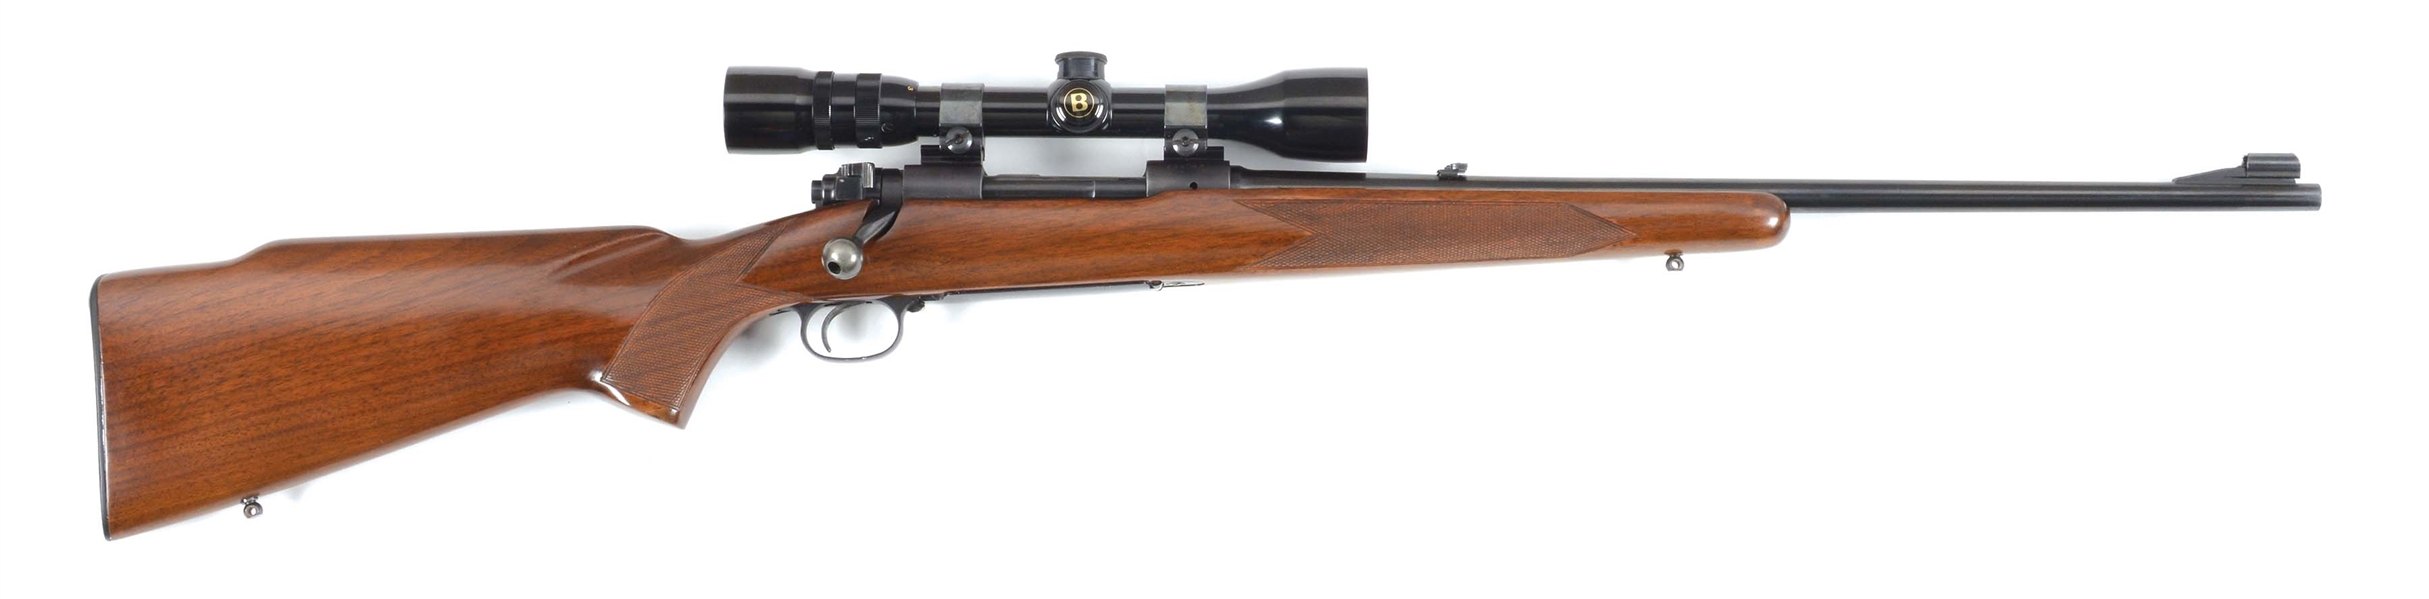 (C) WINCHESTER MODEL 70 BOLT ACTION RIFLE WITH SCOPE (1955).